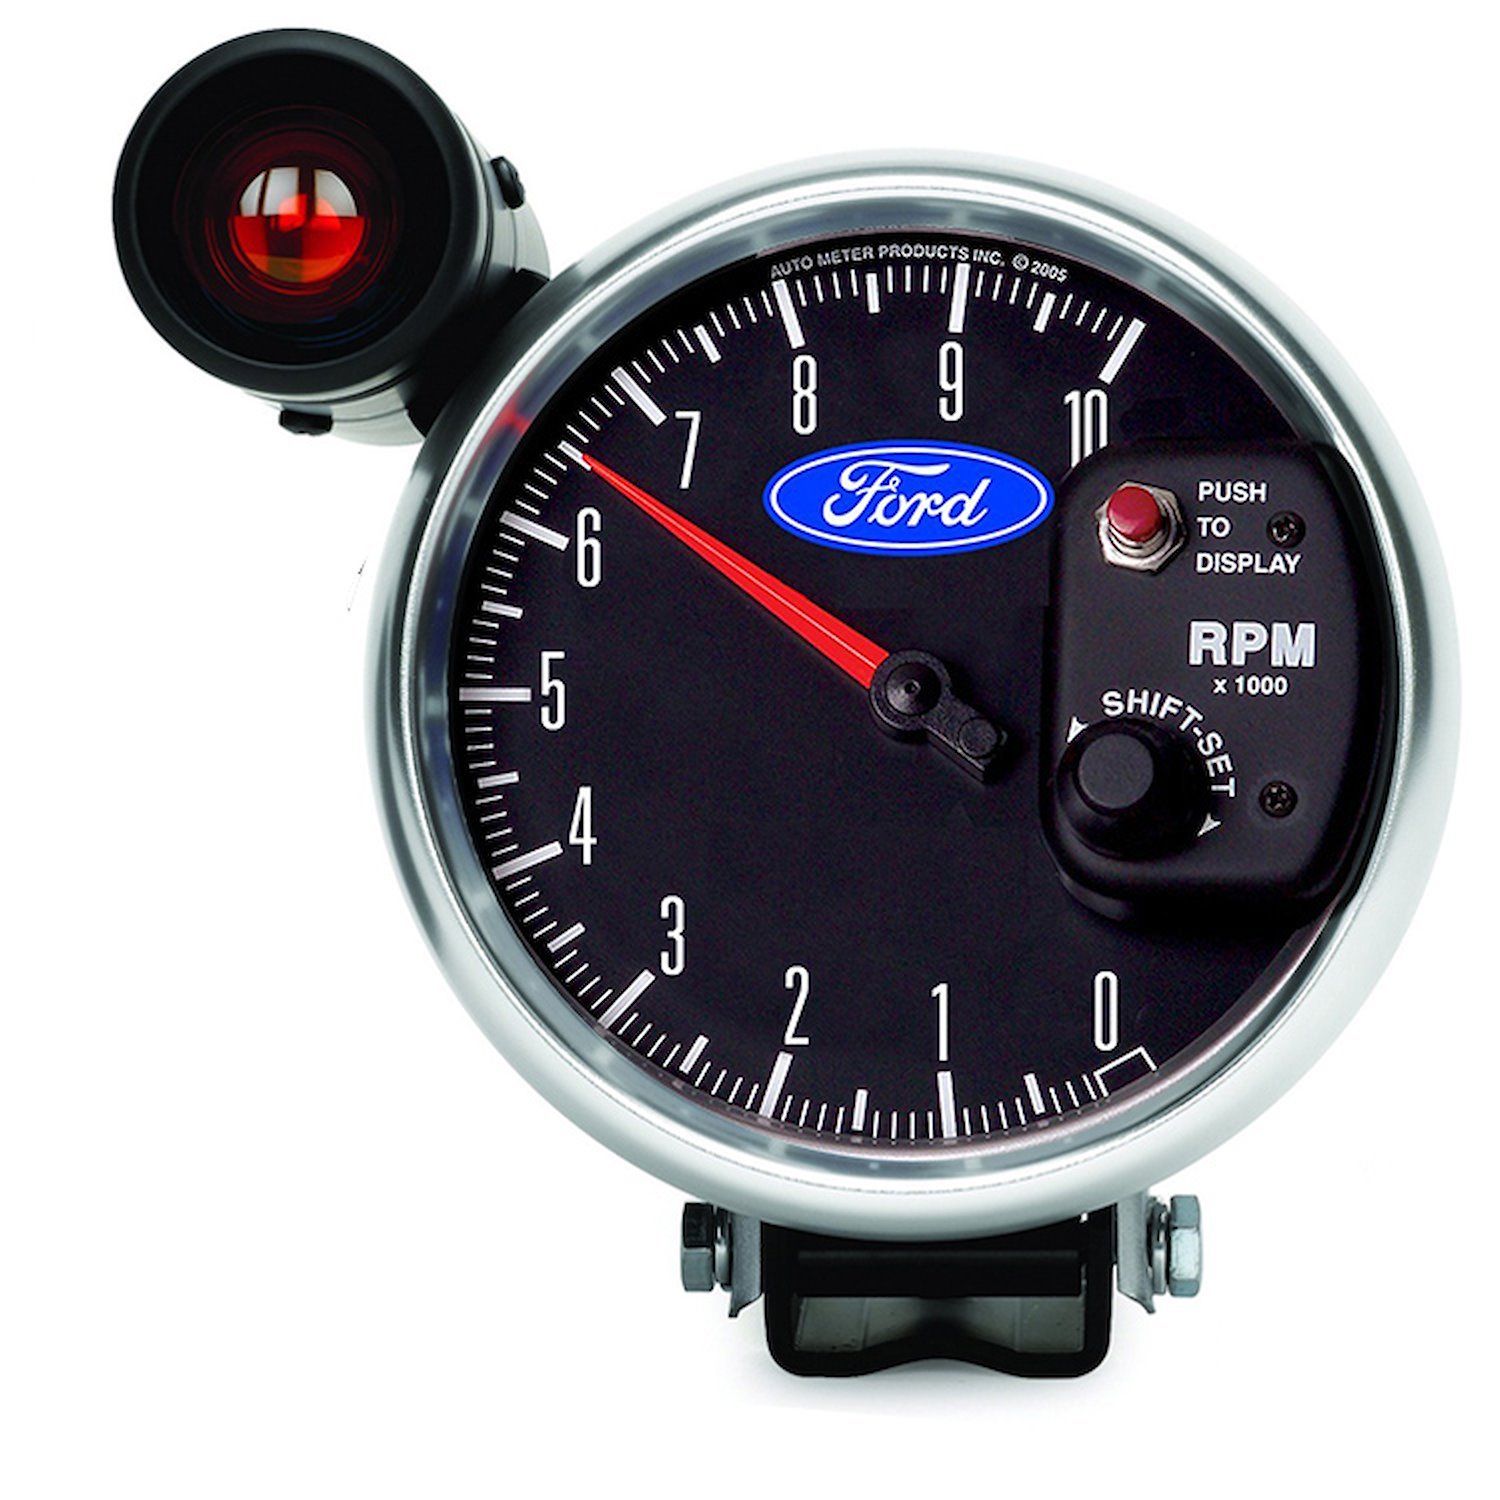 Officially-Licensed Ford Tachometer 5 in., 0-10,000 RPM,